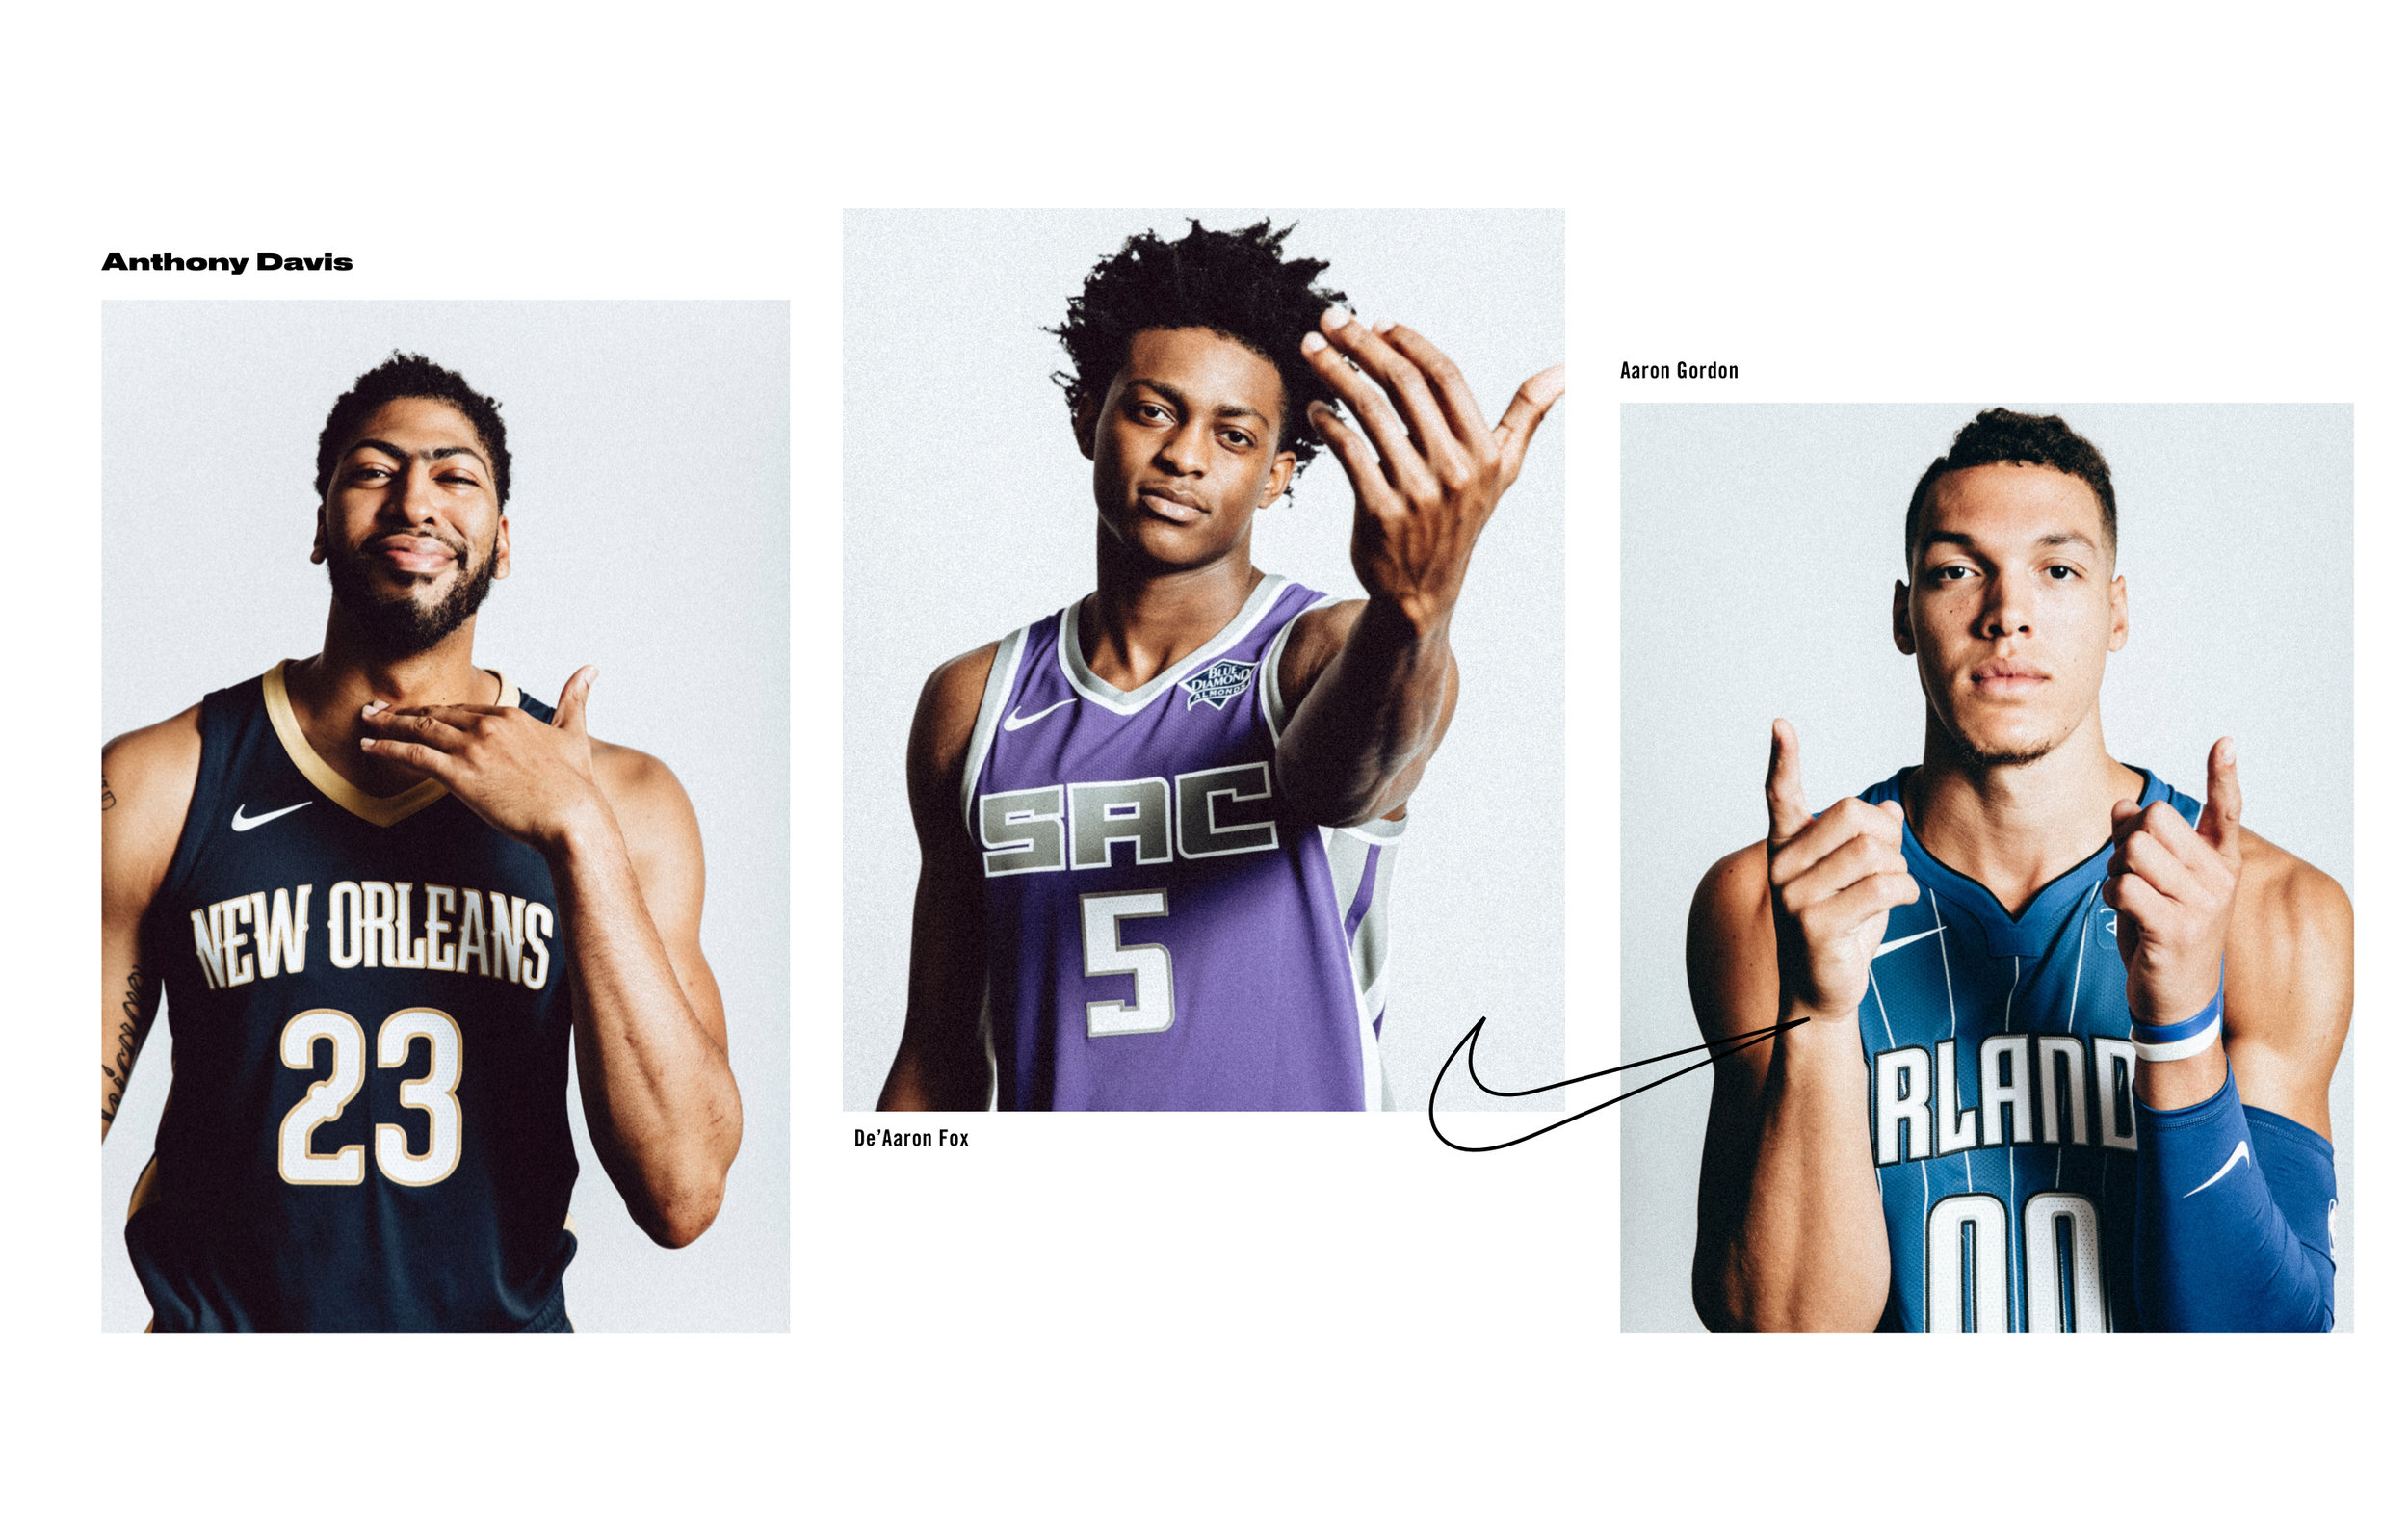 Introducing the Nike NBA Connected Jersey. 